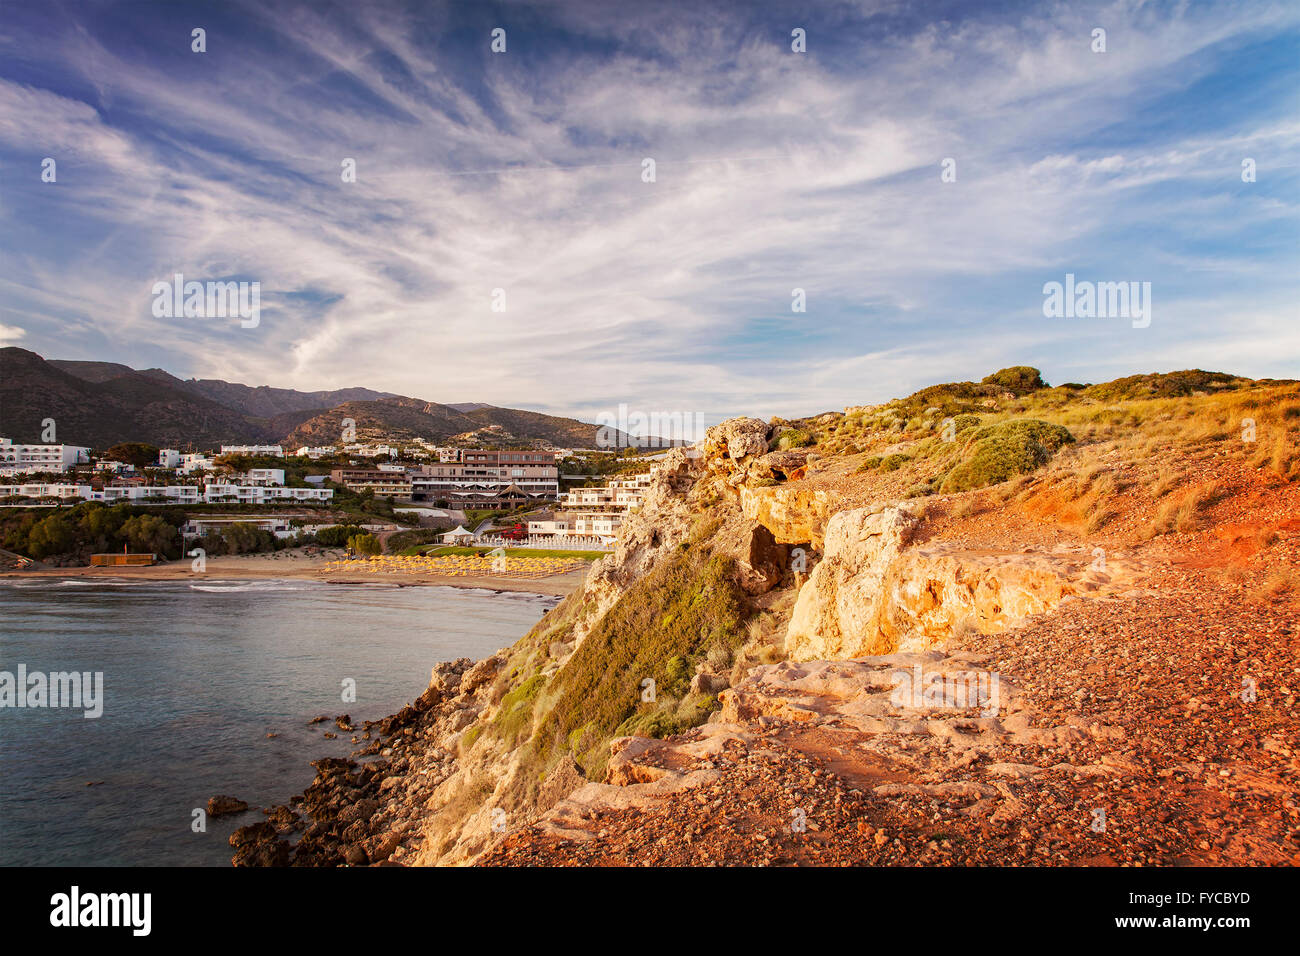 Image of the hilly landscape of south east Crete, Greece. Stock Photo